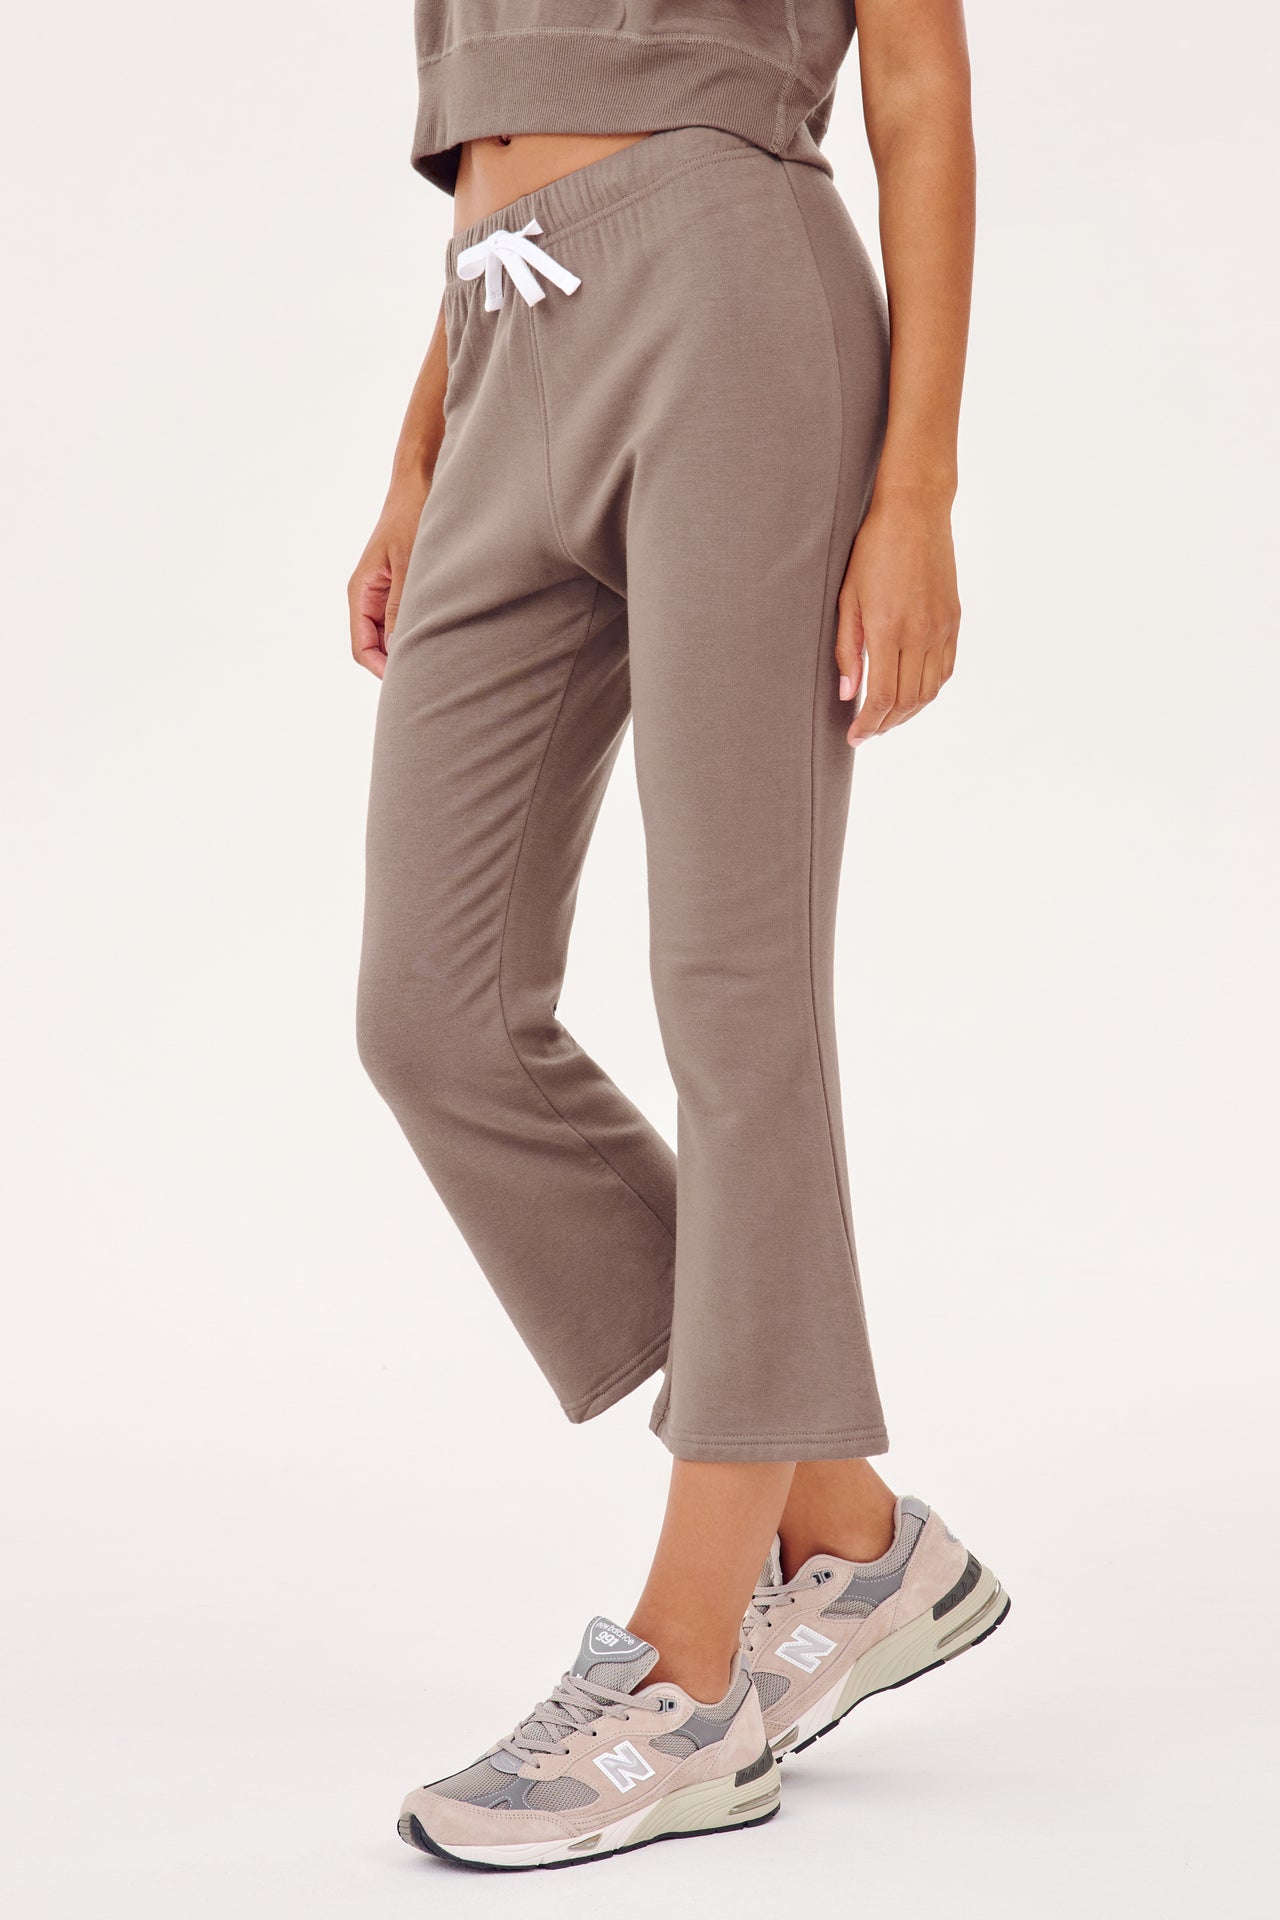 A woman wearing cozy, tan Brooks Fleece Cropped Flare - Lentil sweat pants and sneakers, ideal for workouts from SPLITS59.